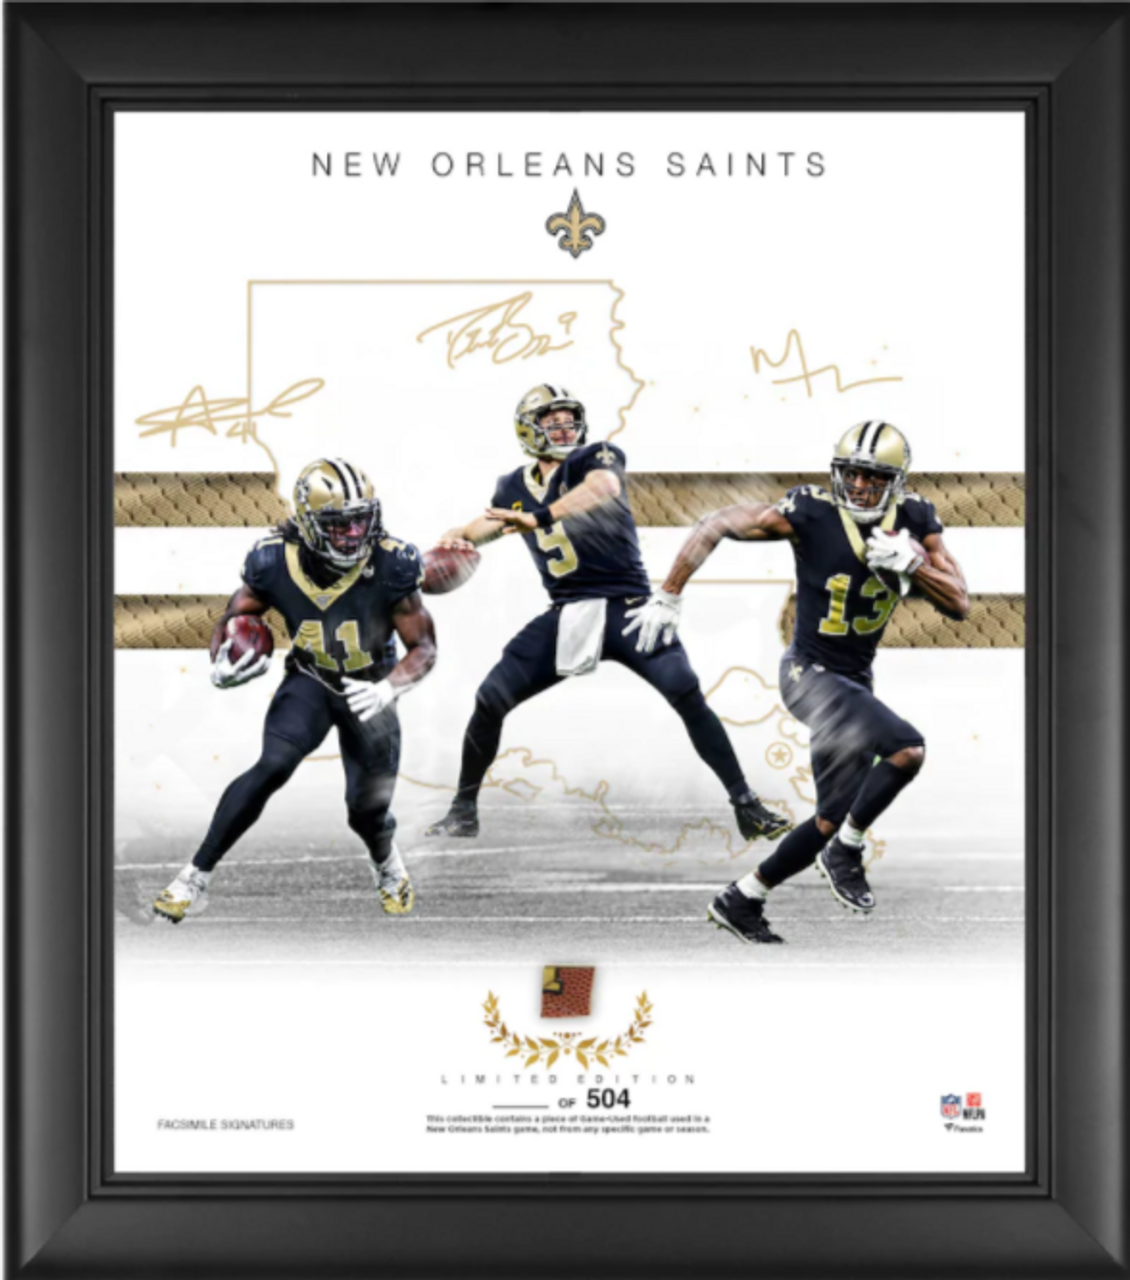 Buy New Orleans Saints Authentic Framed s Authentic Framed 15' x 17'  Franchise Foundations Collage-Limited Edition at Nikco Sports